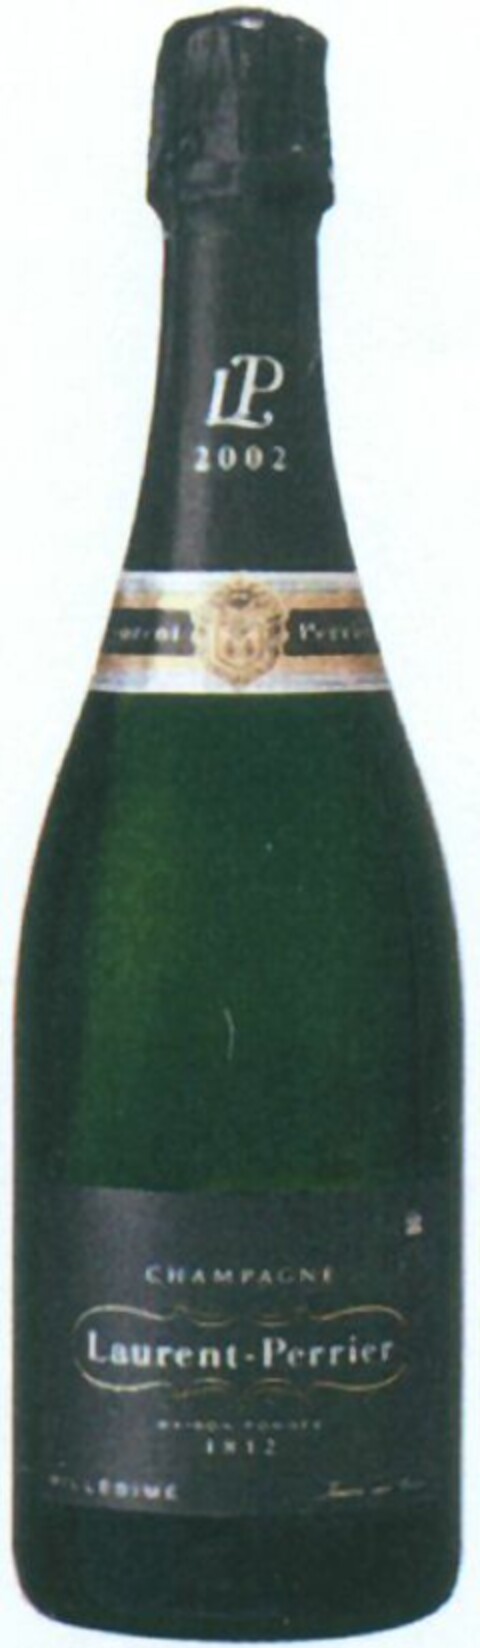 LP 2002 CHAMPAGNE Laurent-Perrier Logo (WIPO, 08.02.2011)